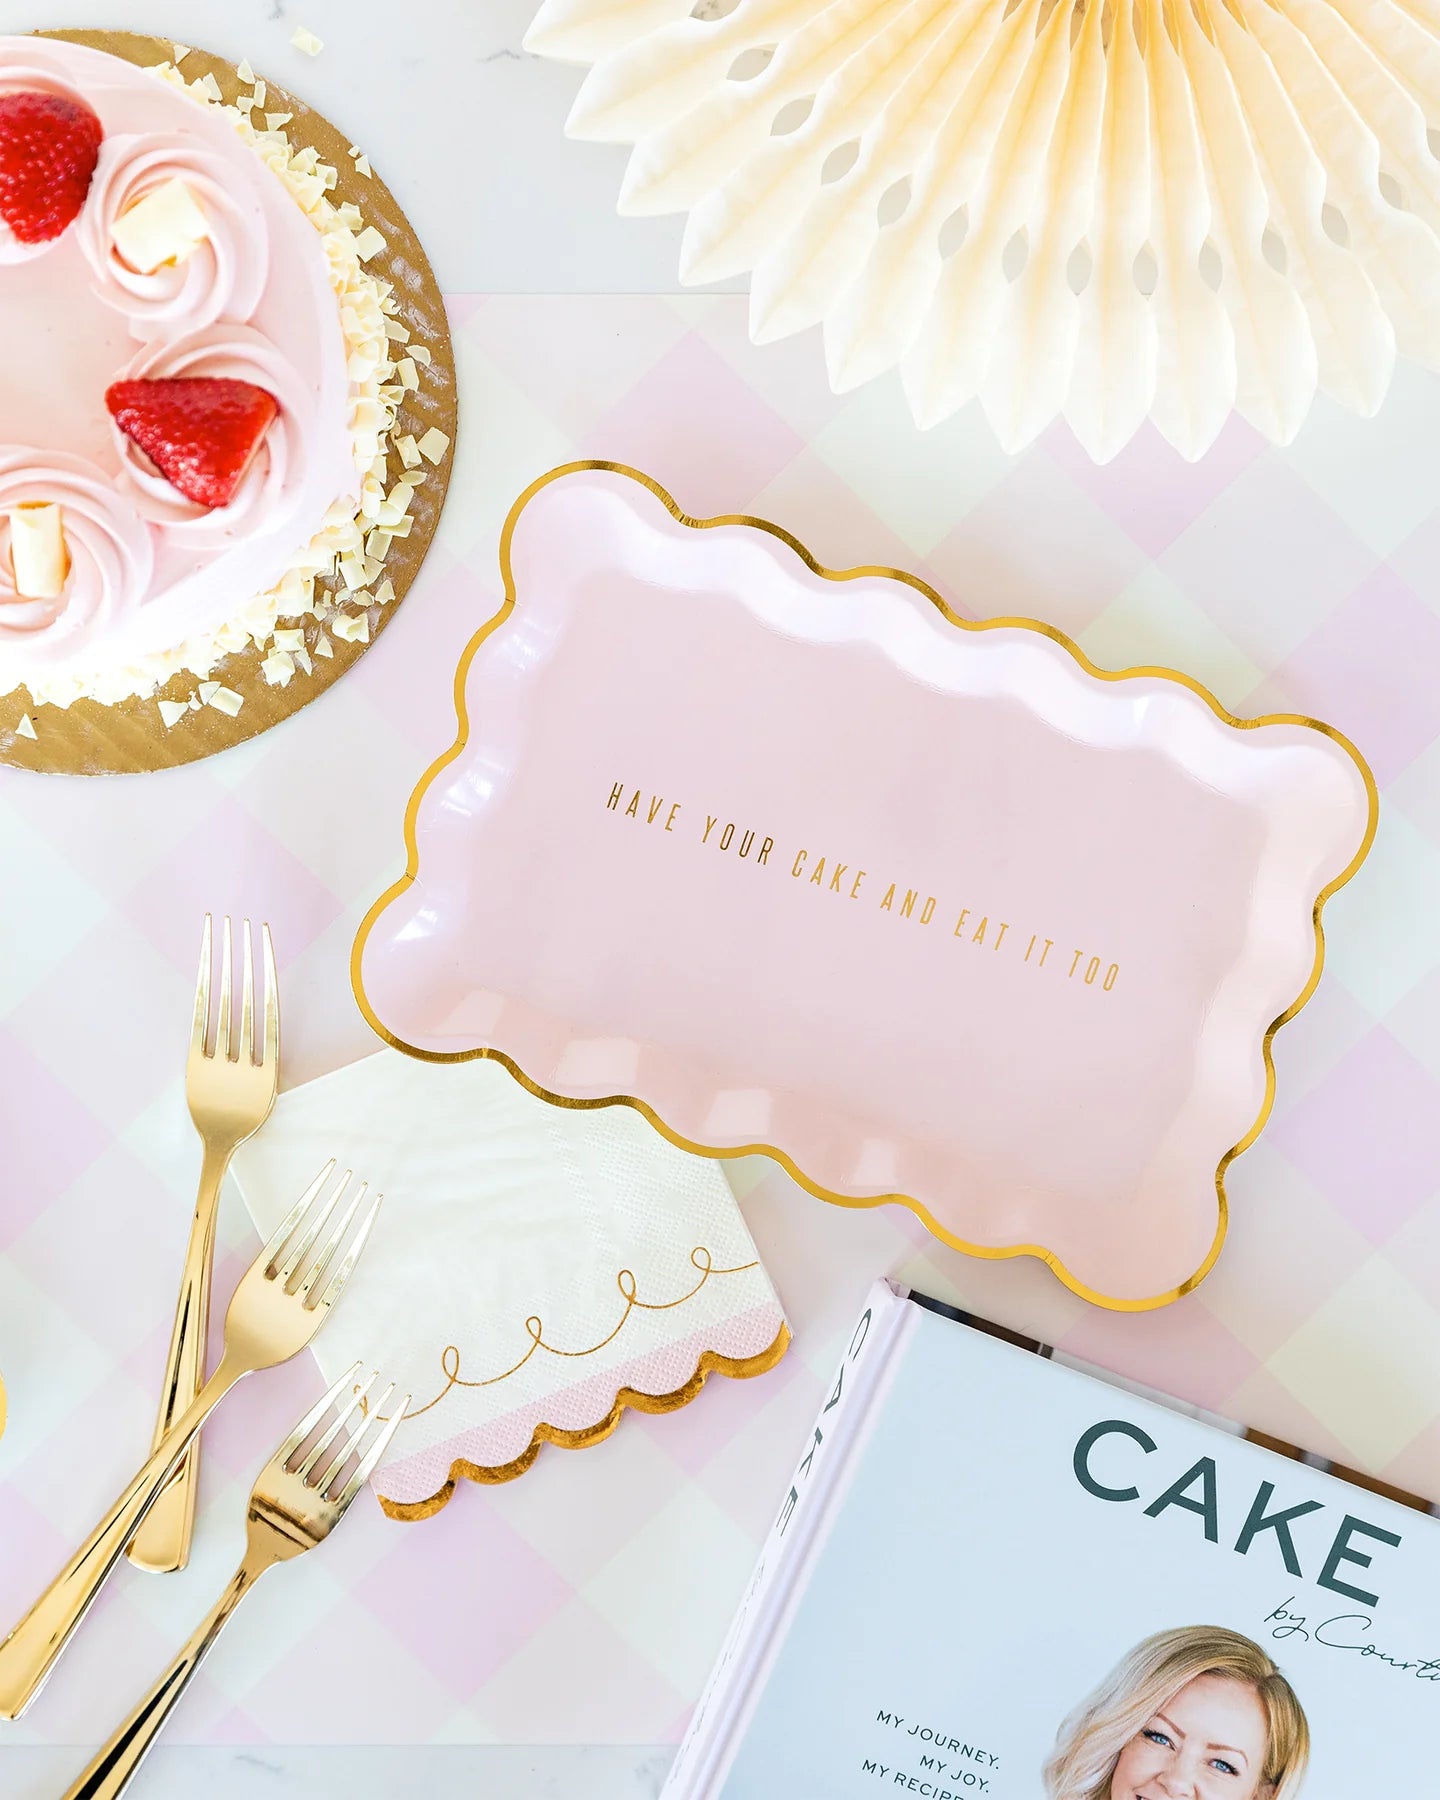 Scalloped Rectangle Plates: Have Your Cake and Eat It Too